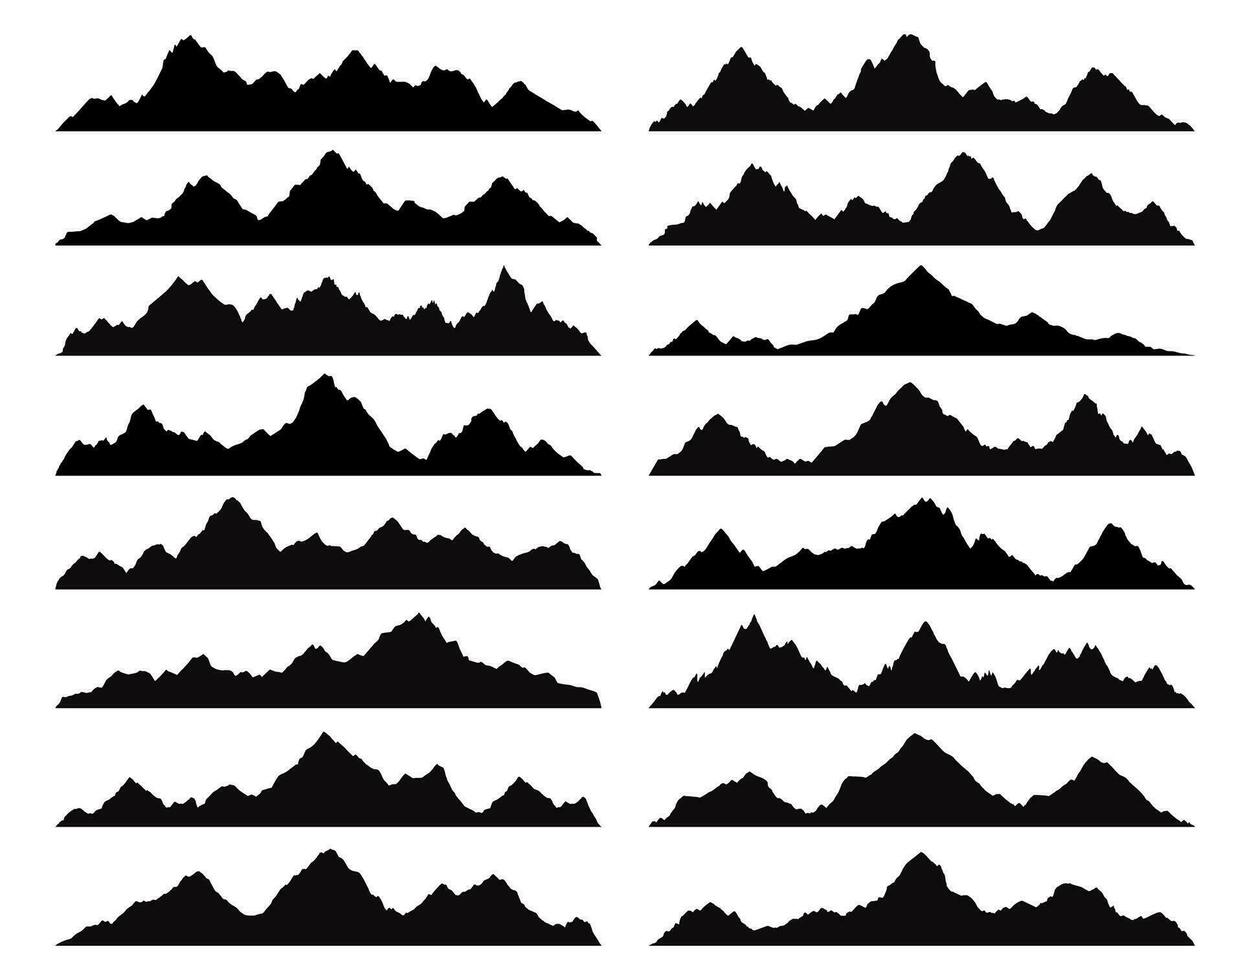 Black rock, hill and mountain isolated silhouettes vector